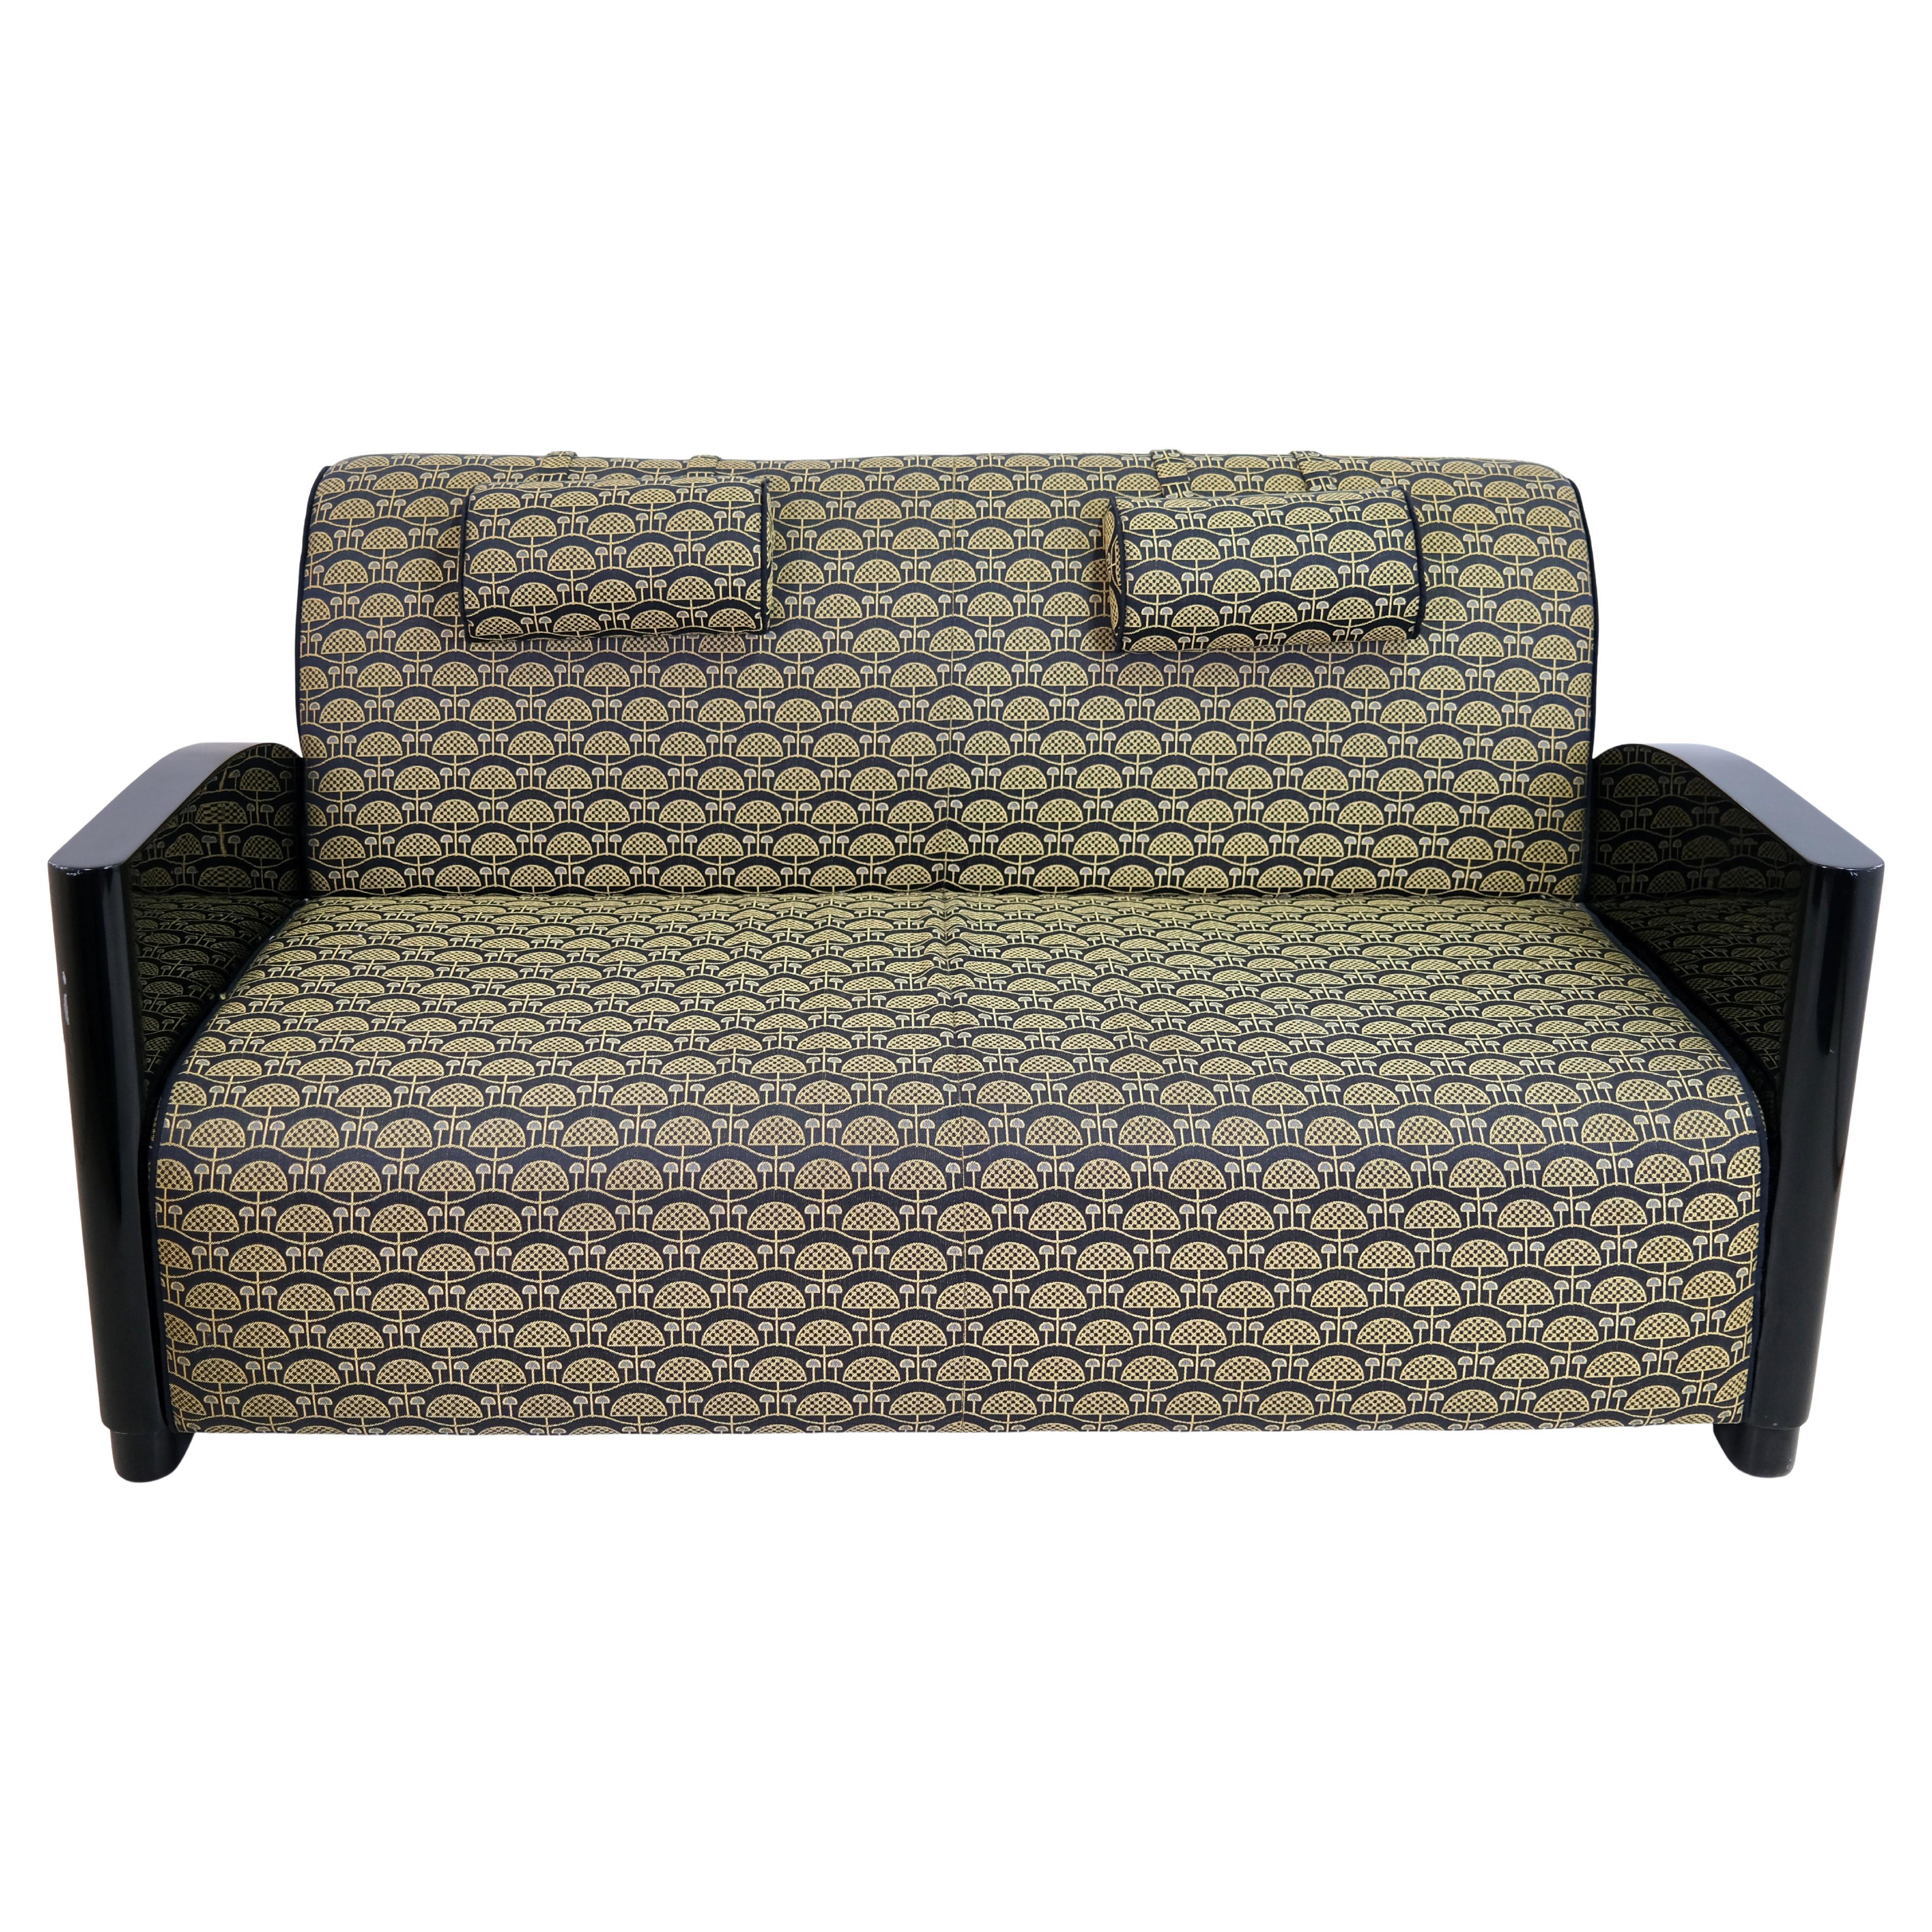 Art Deco Sofa in Black Lacquer and Golden Upholstery